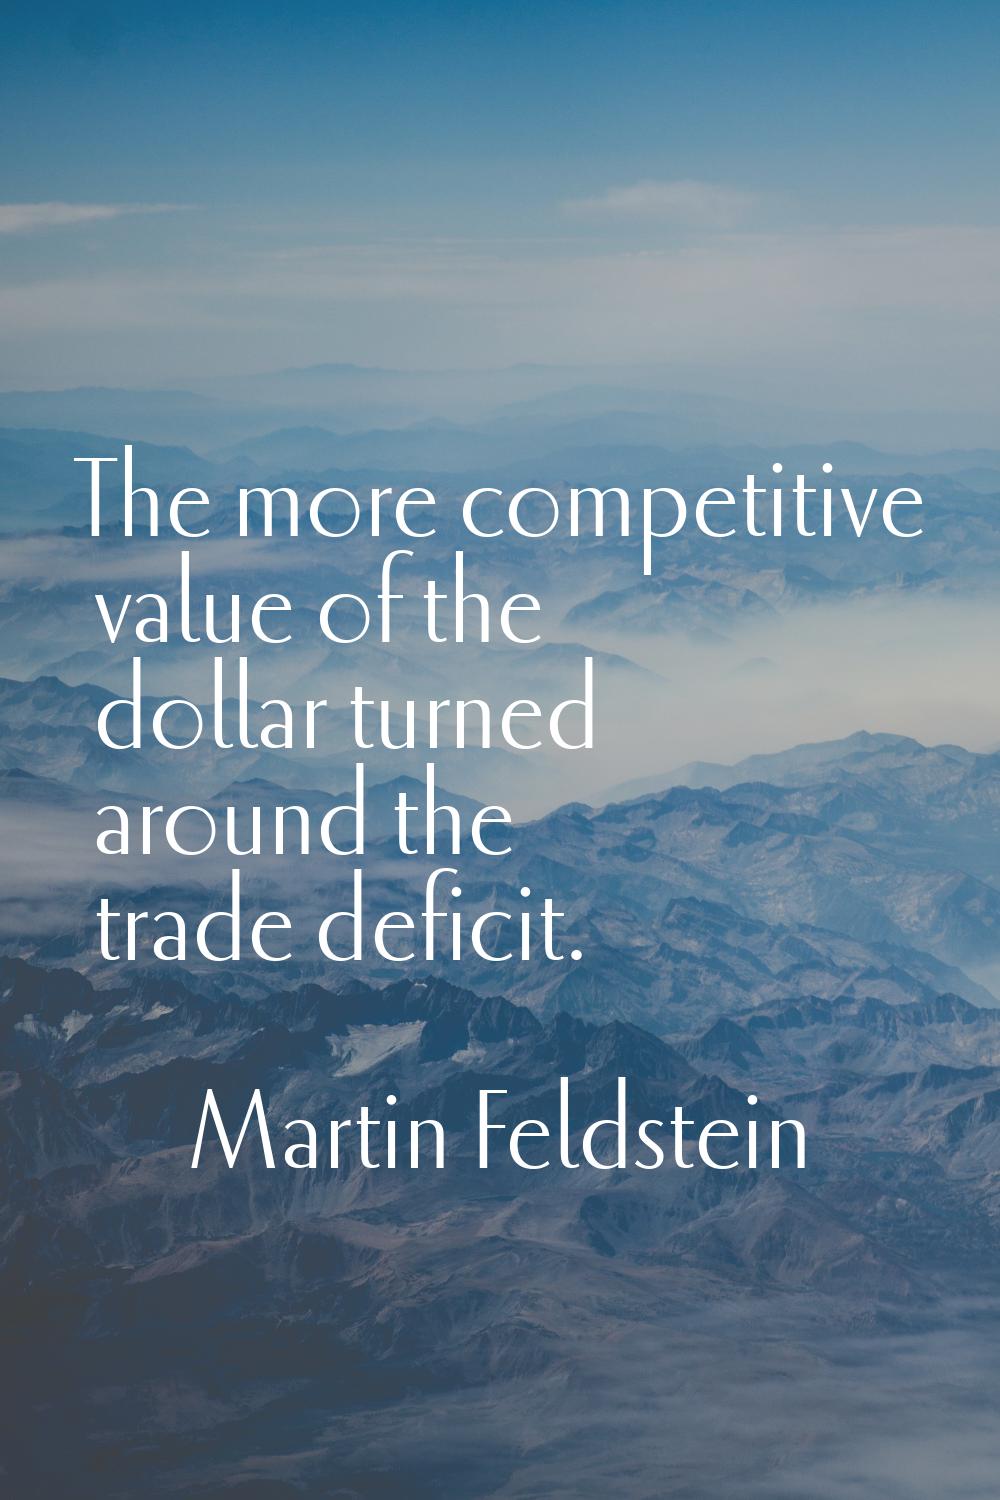 The more competitive value of the dollar turned around the trade deficit.